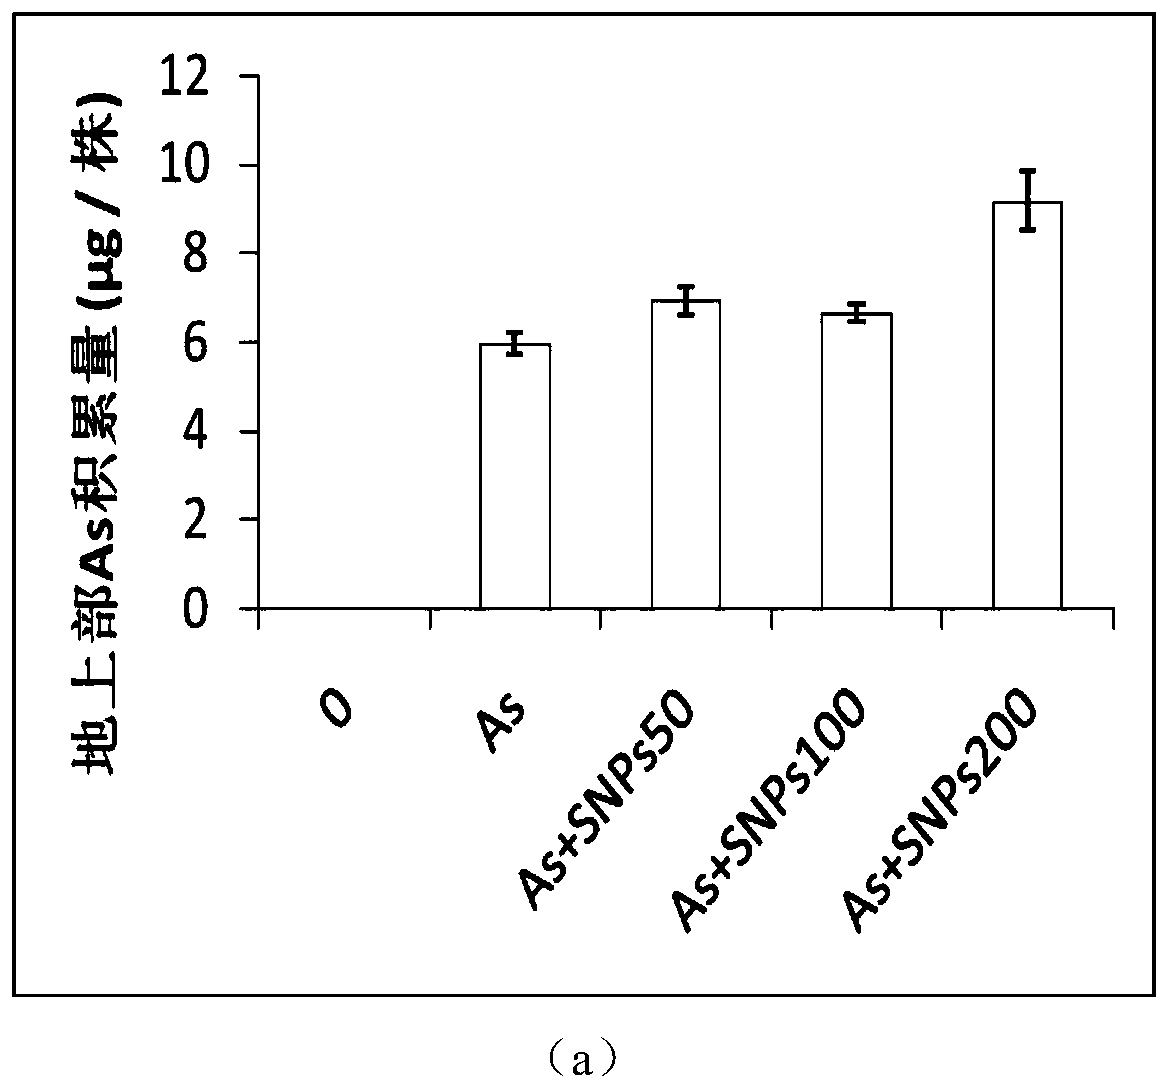 Novel material and method for promoting plant growth and arsenic-absorbing accumulation